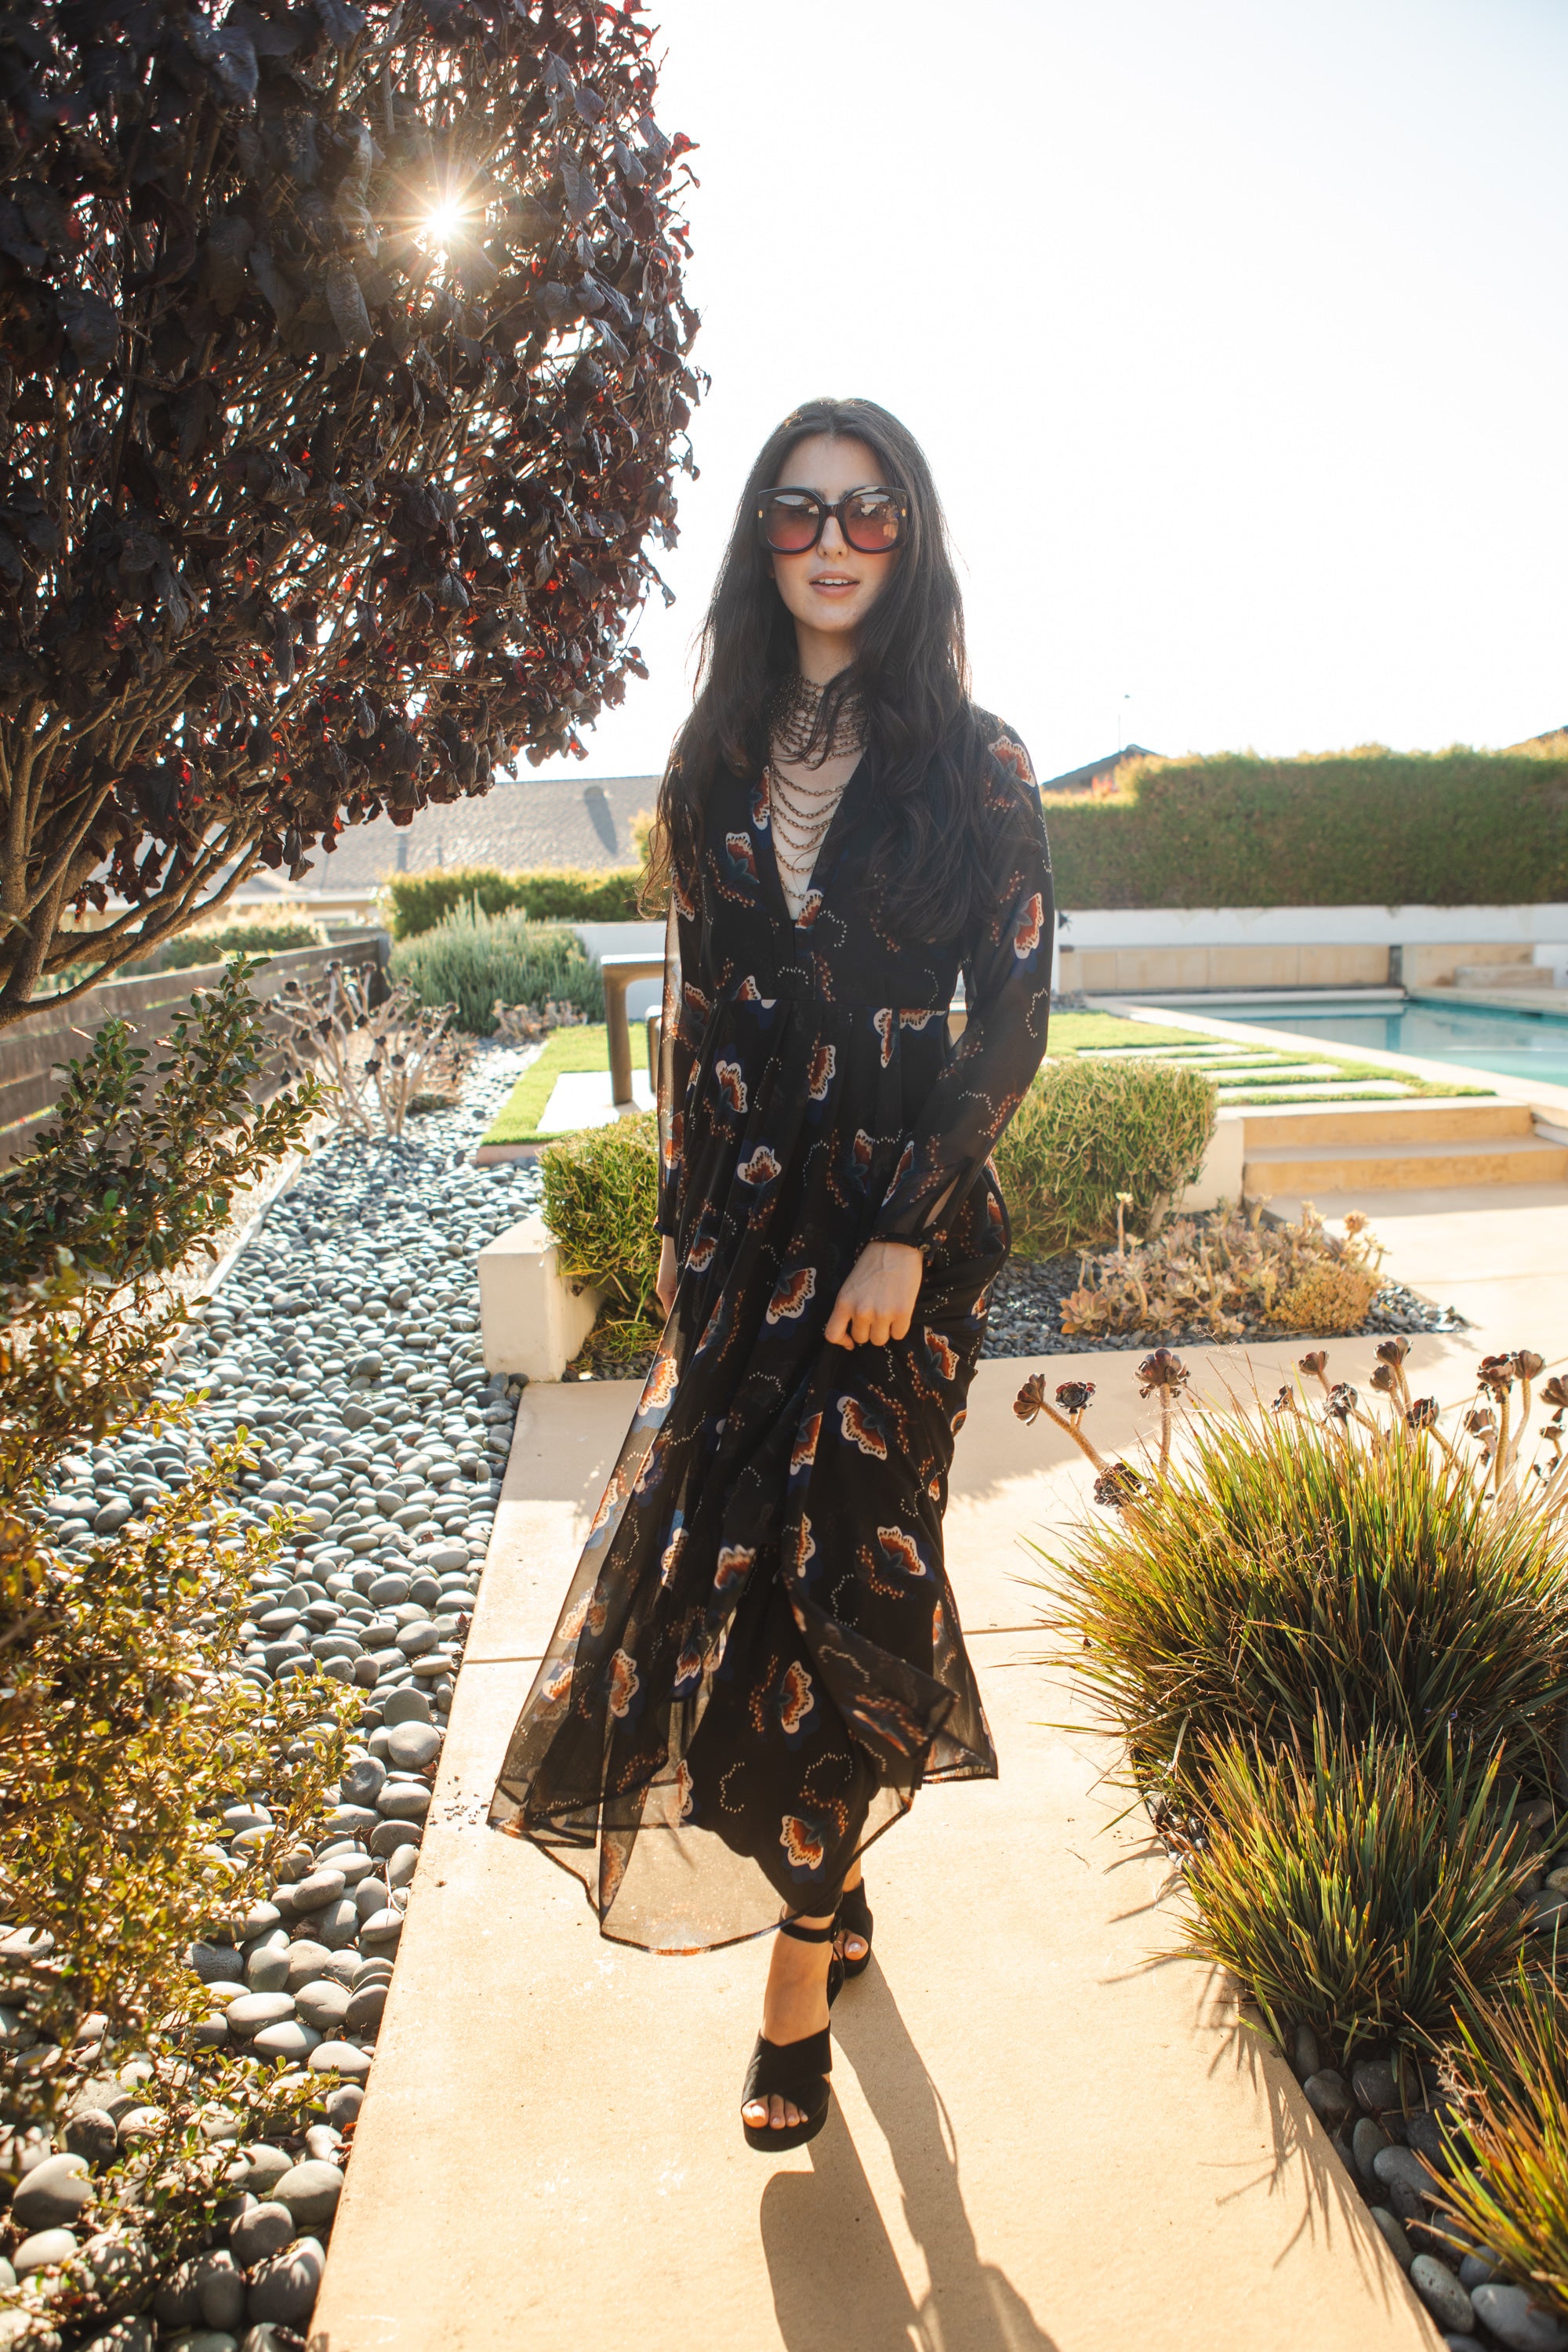 Styling Your Floral Maxi Dress for Fall, LMents of Style